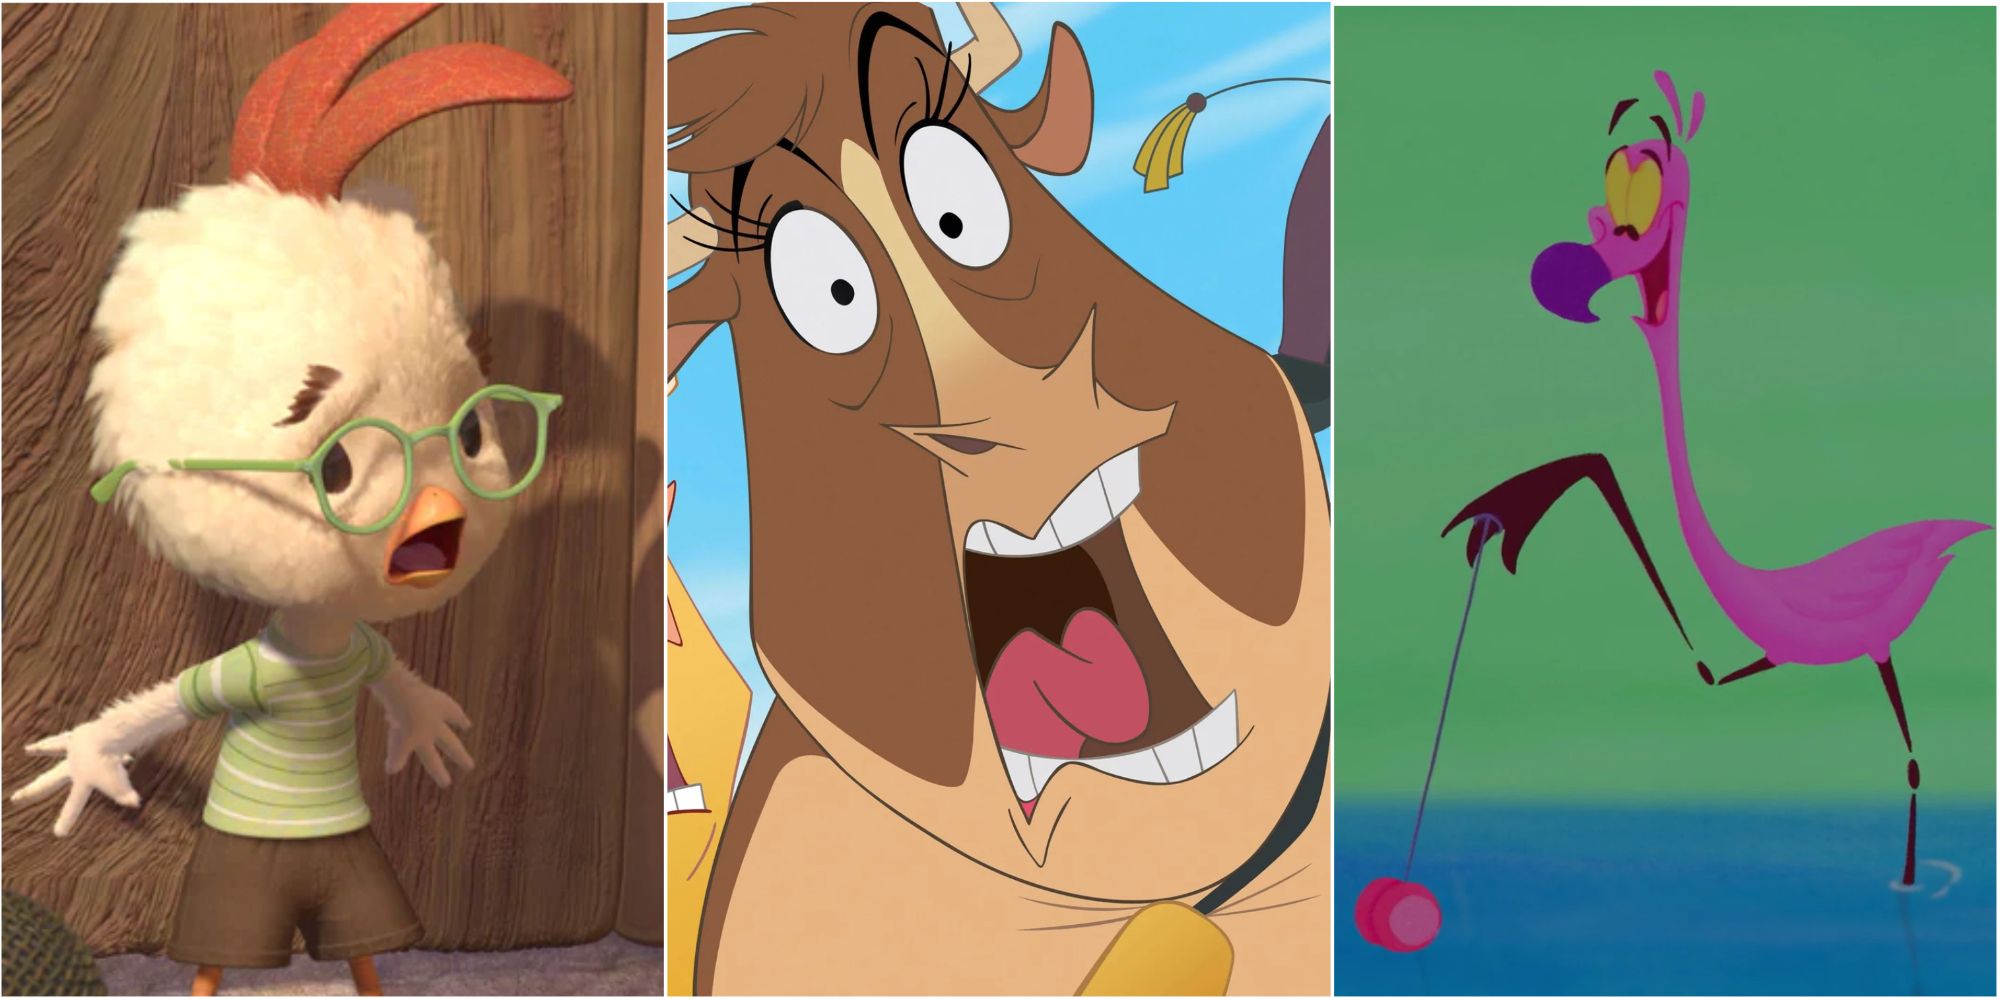 10 21st Century Disney Animated Films That Didn't Meet Expectations